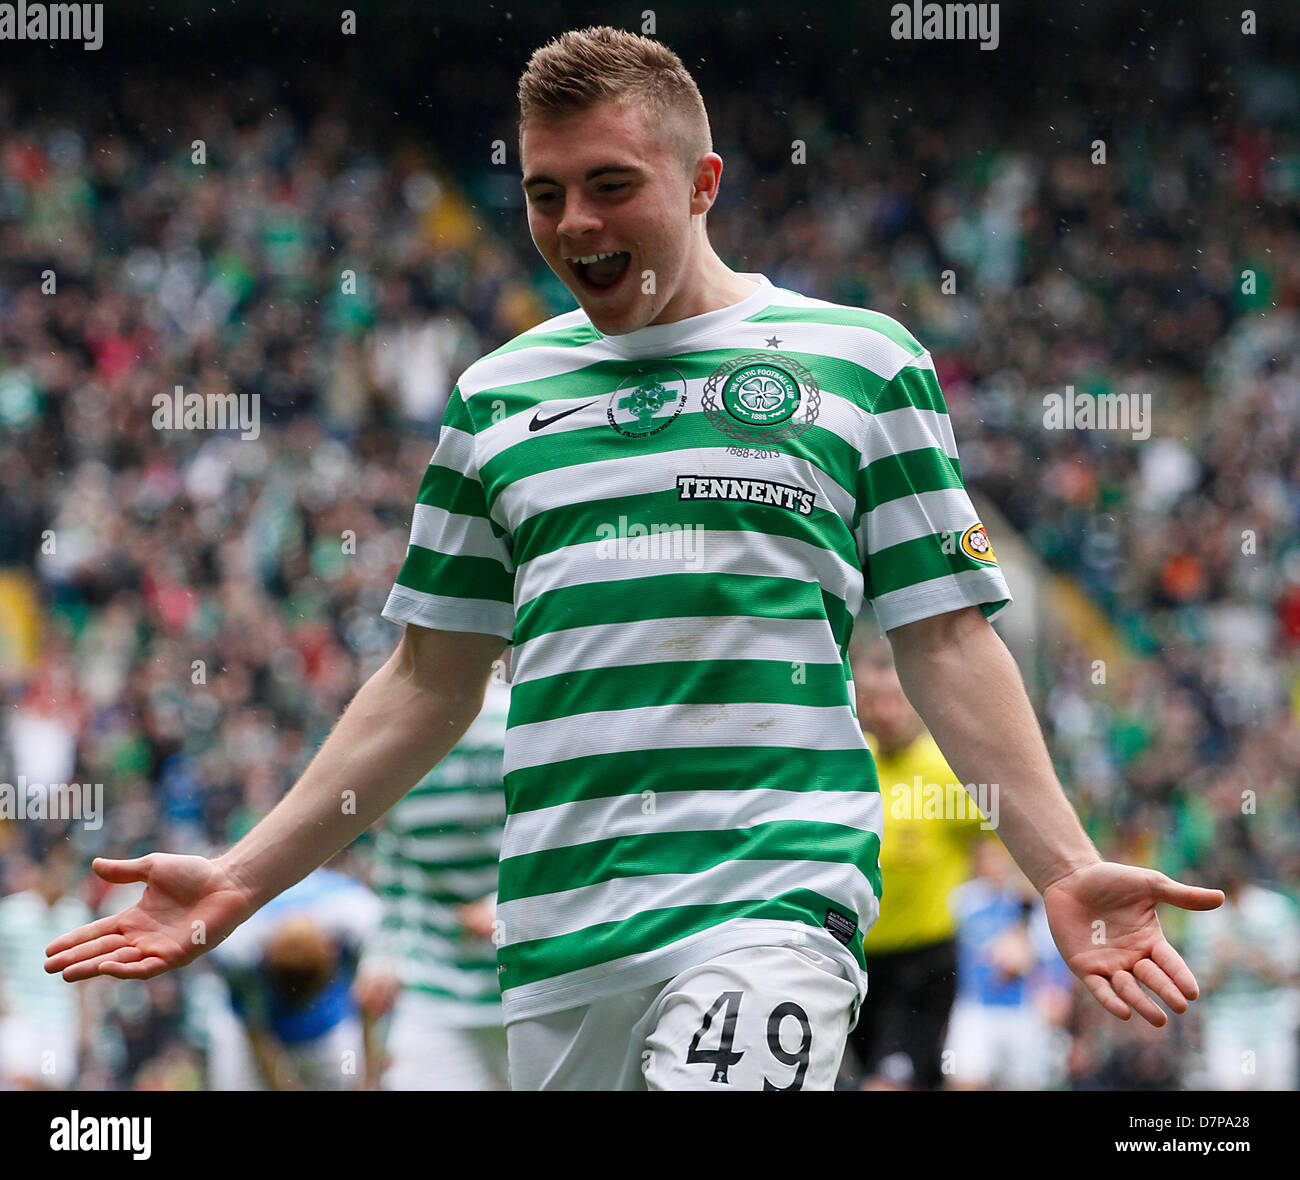 Glasgow, Scotland, 11th May 2013. James Forrest celebrates his goal during the Scottish Premier League game between Celtic and St Johnstone from Celtic Park. Action Plus Sports Images/Alamy Live News Stock Photo